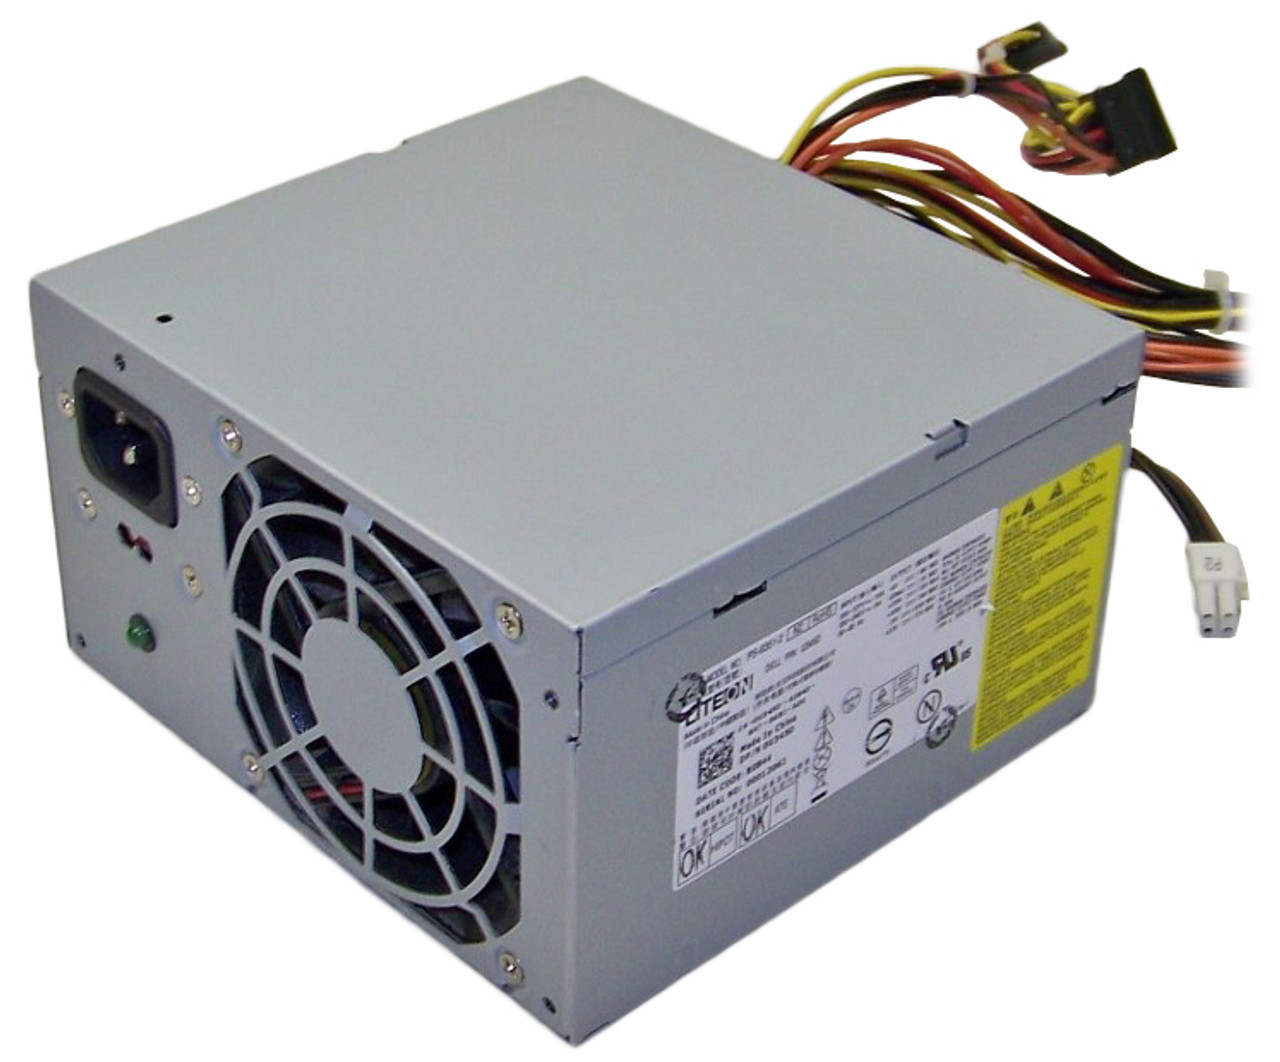 EMABXG10001 Dell 650-Watts Power Supply for PowerVault 224F